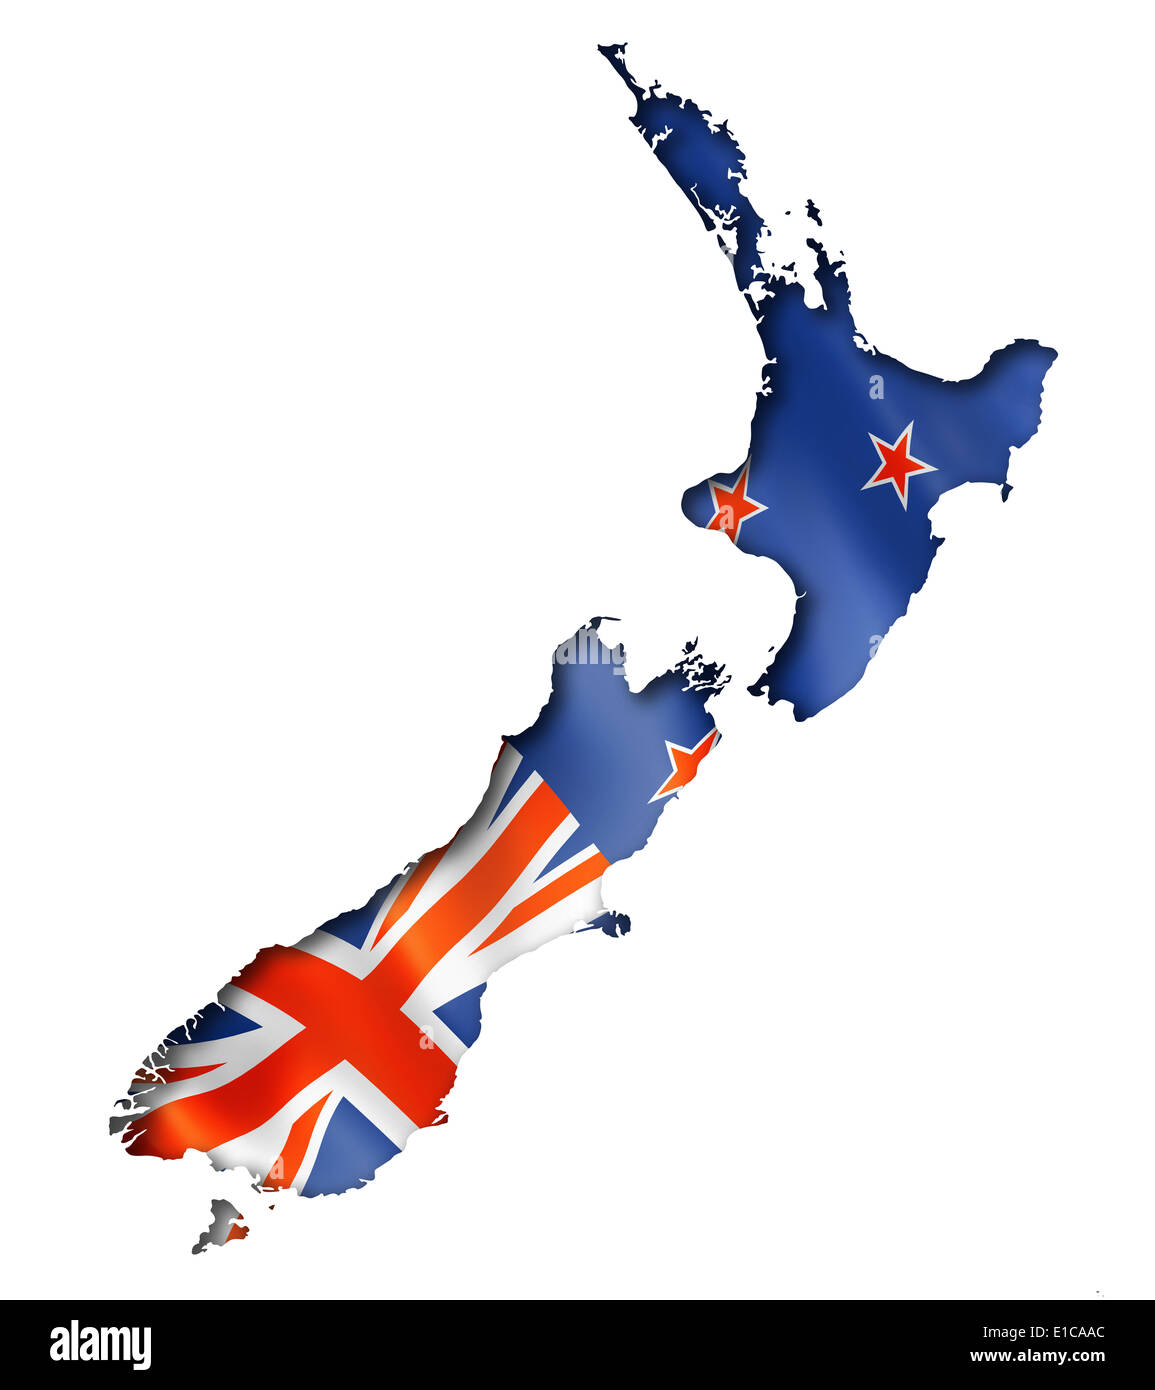 New Zealand flag map, three dimensional render, isolated on white Stock Photo